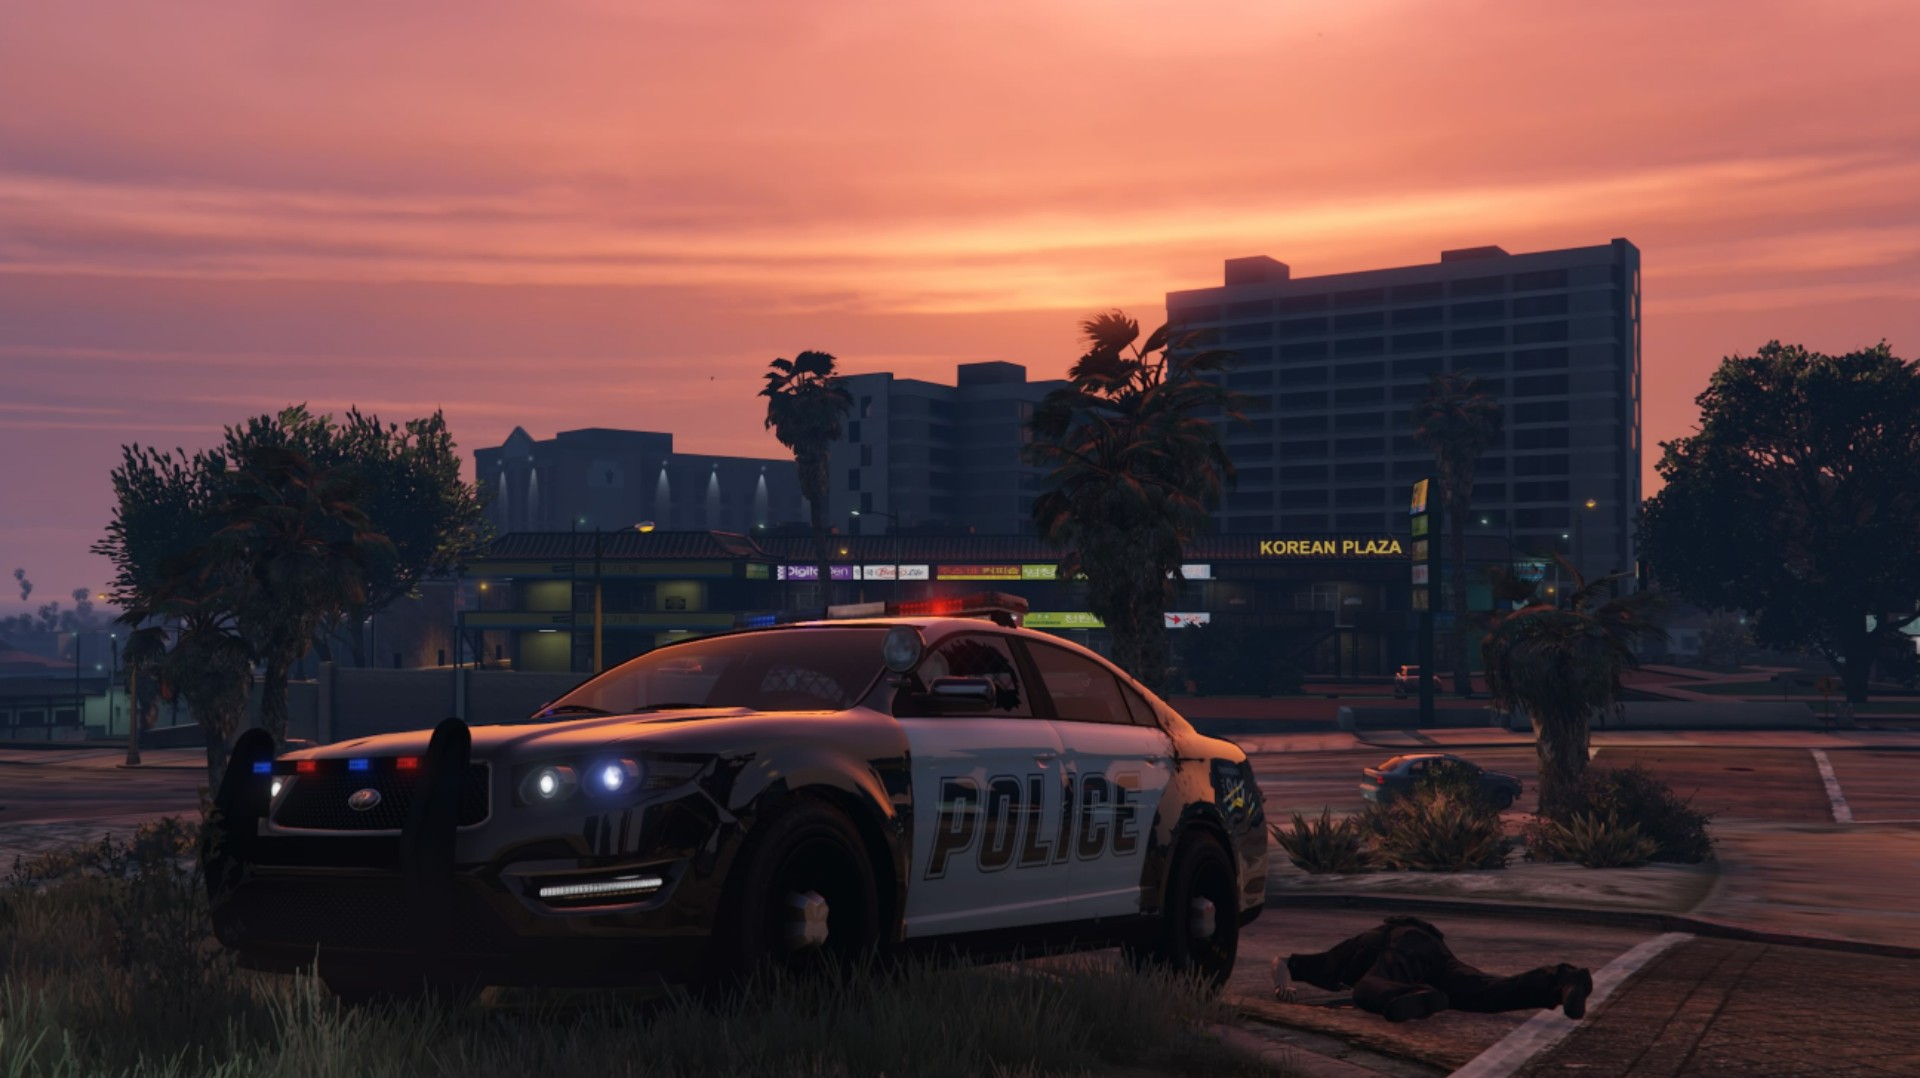 Video: 12 Minutes Of GTA Online Gameplay Captured On PS5